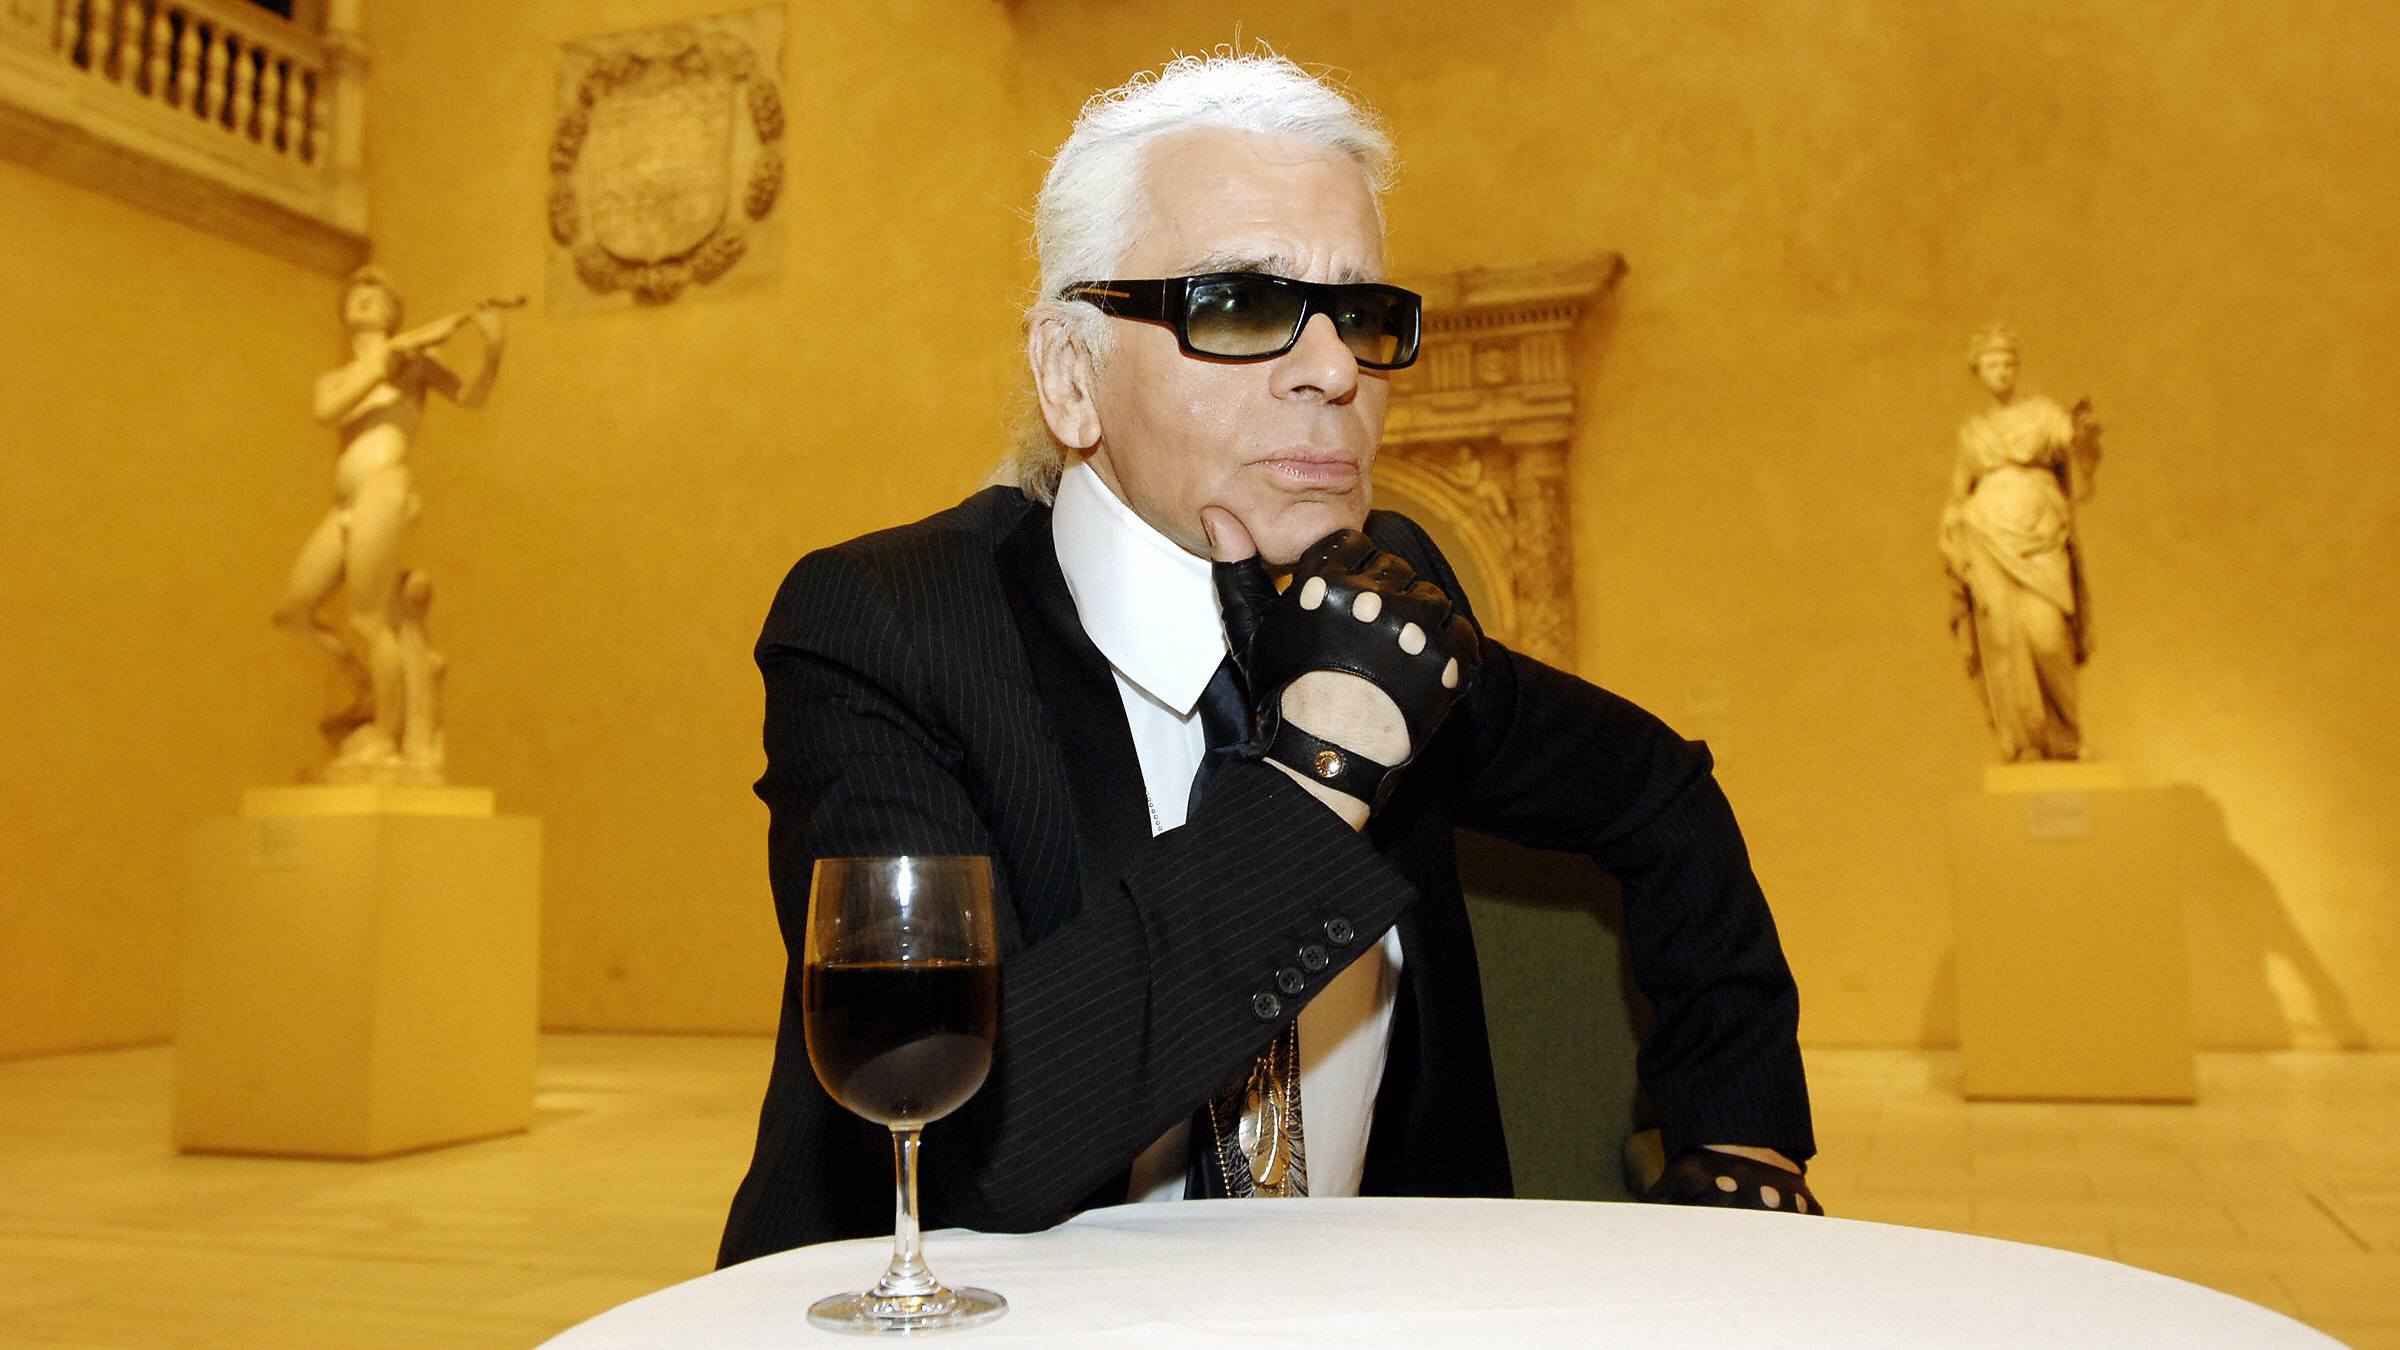 Hoes koppeling storm Chanel creative director Karl Lagerfeld redefined fashion - CNN Style